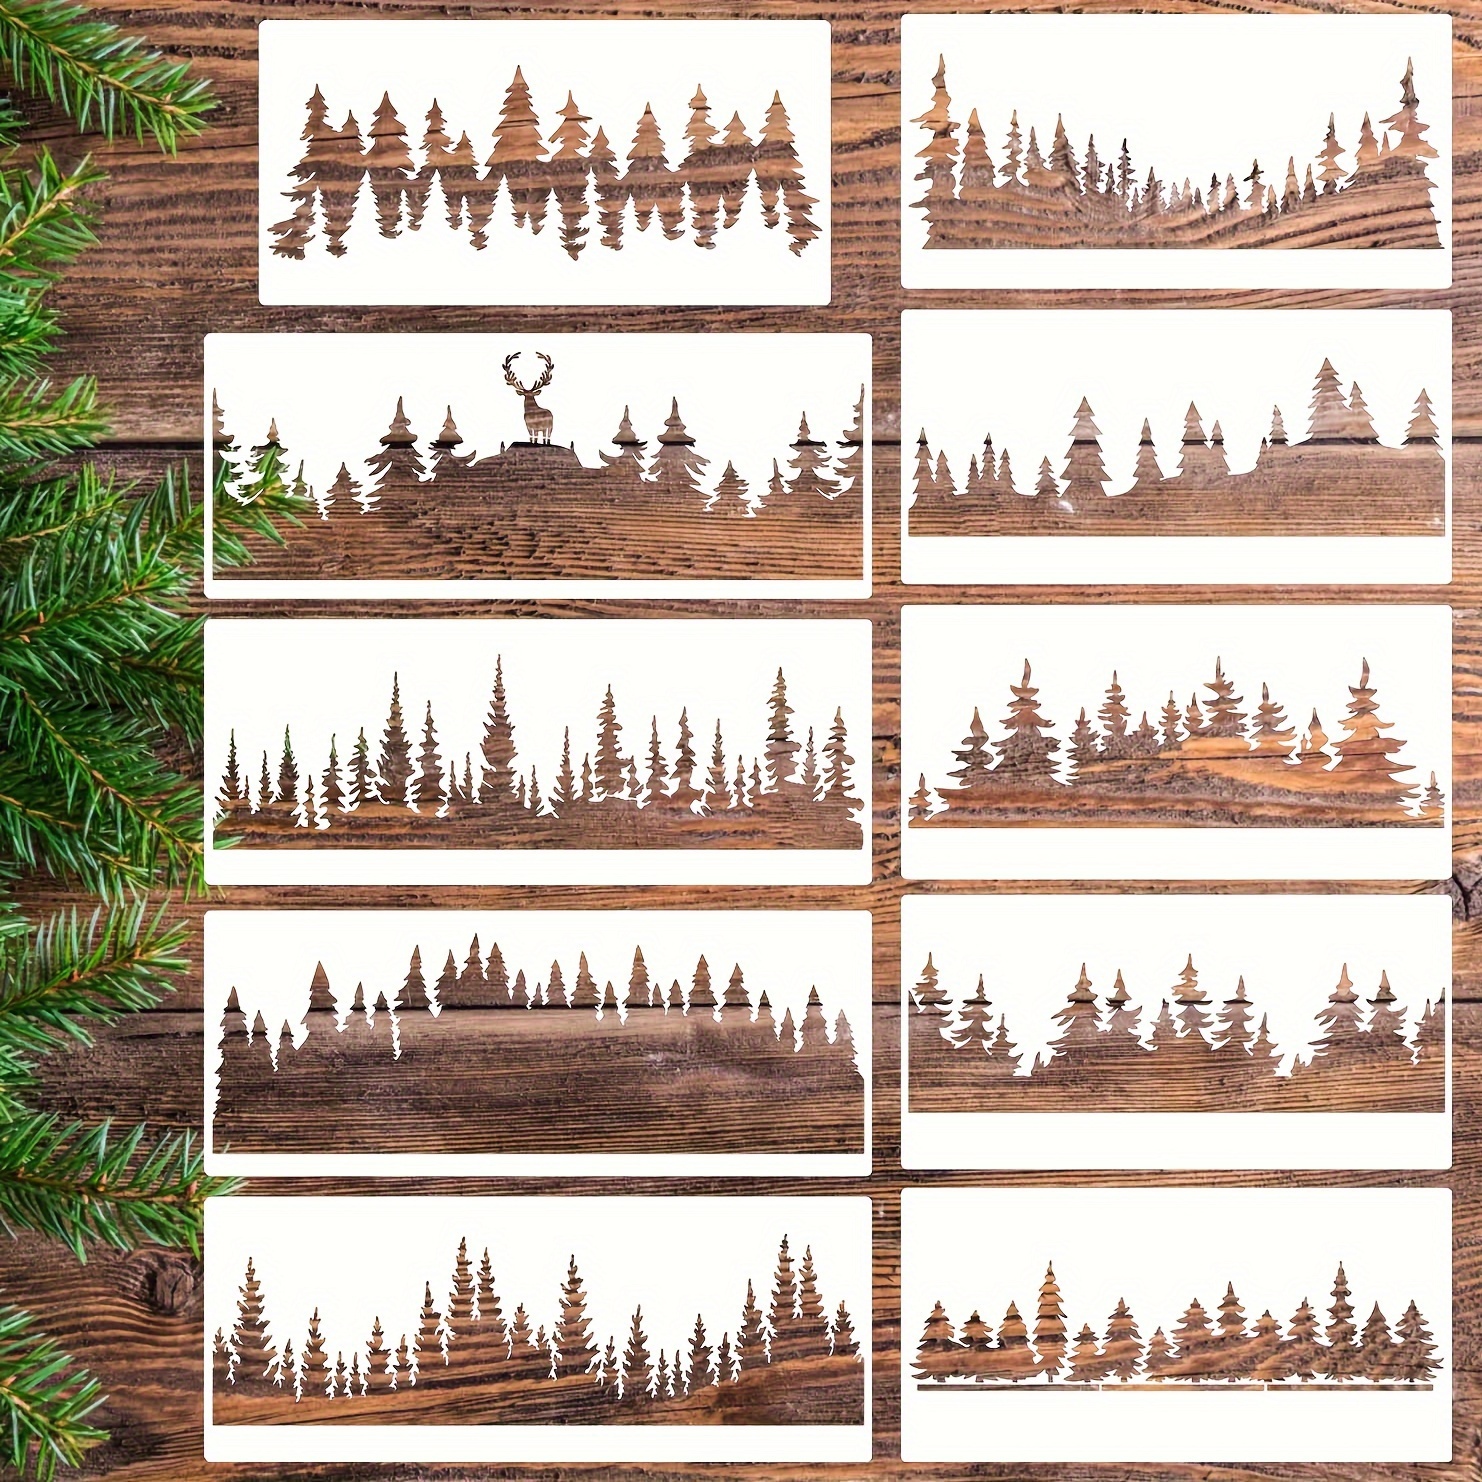 

10pcs Pine Tree Stencils Tree Stencil Forest Stencil Wood Burning Stencils Patterns Reusable Drawing Templates For Painting On Wood Wall Fabric Furniture